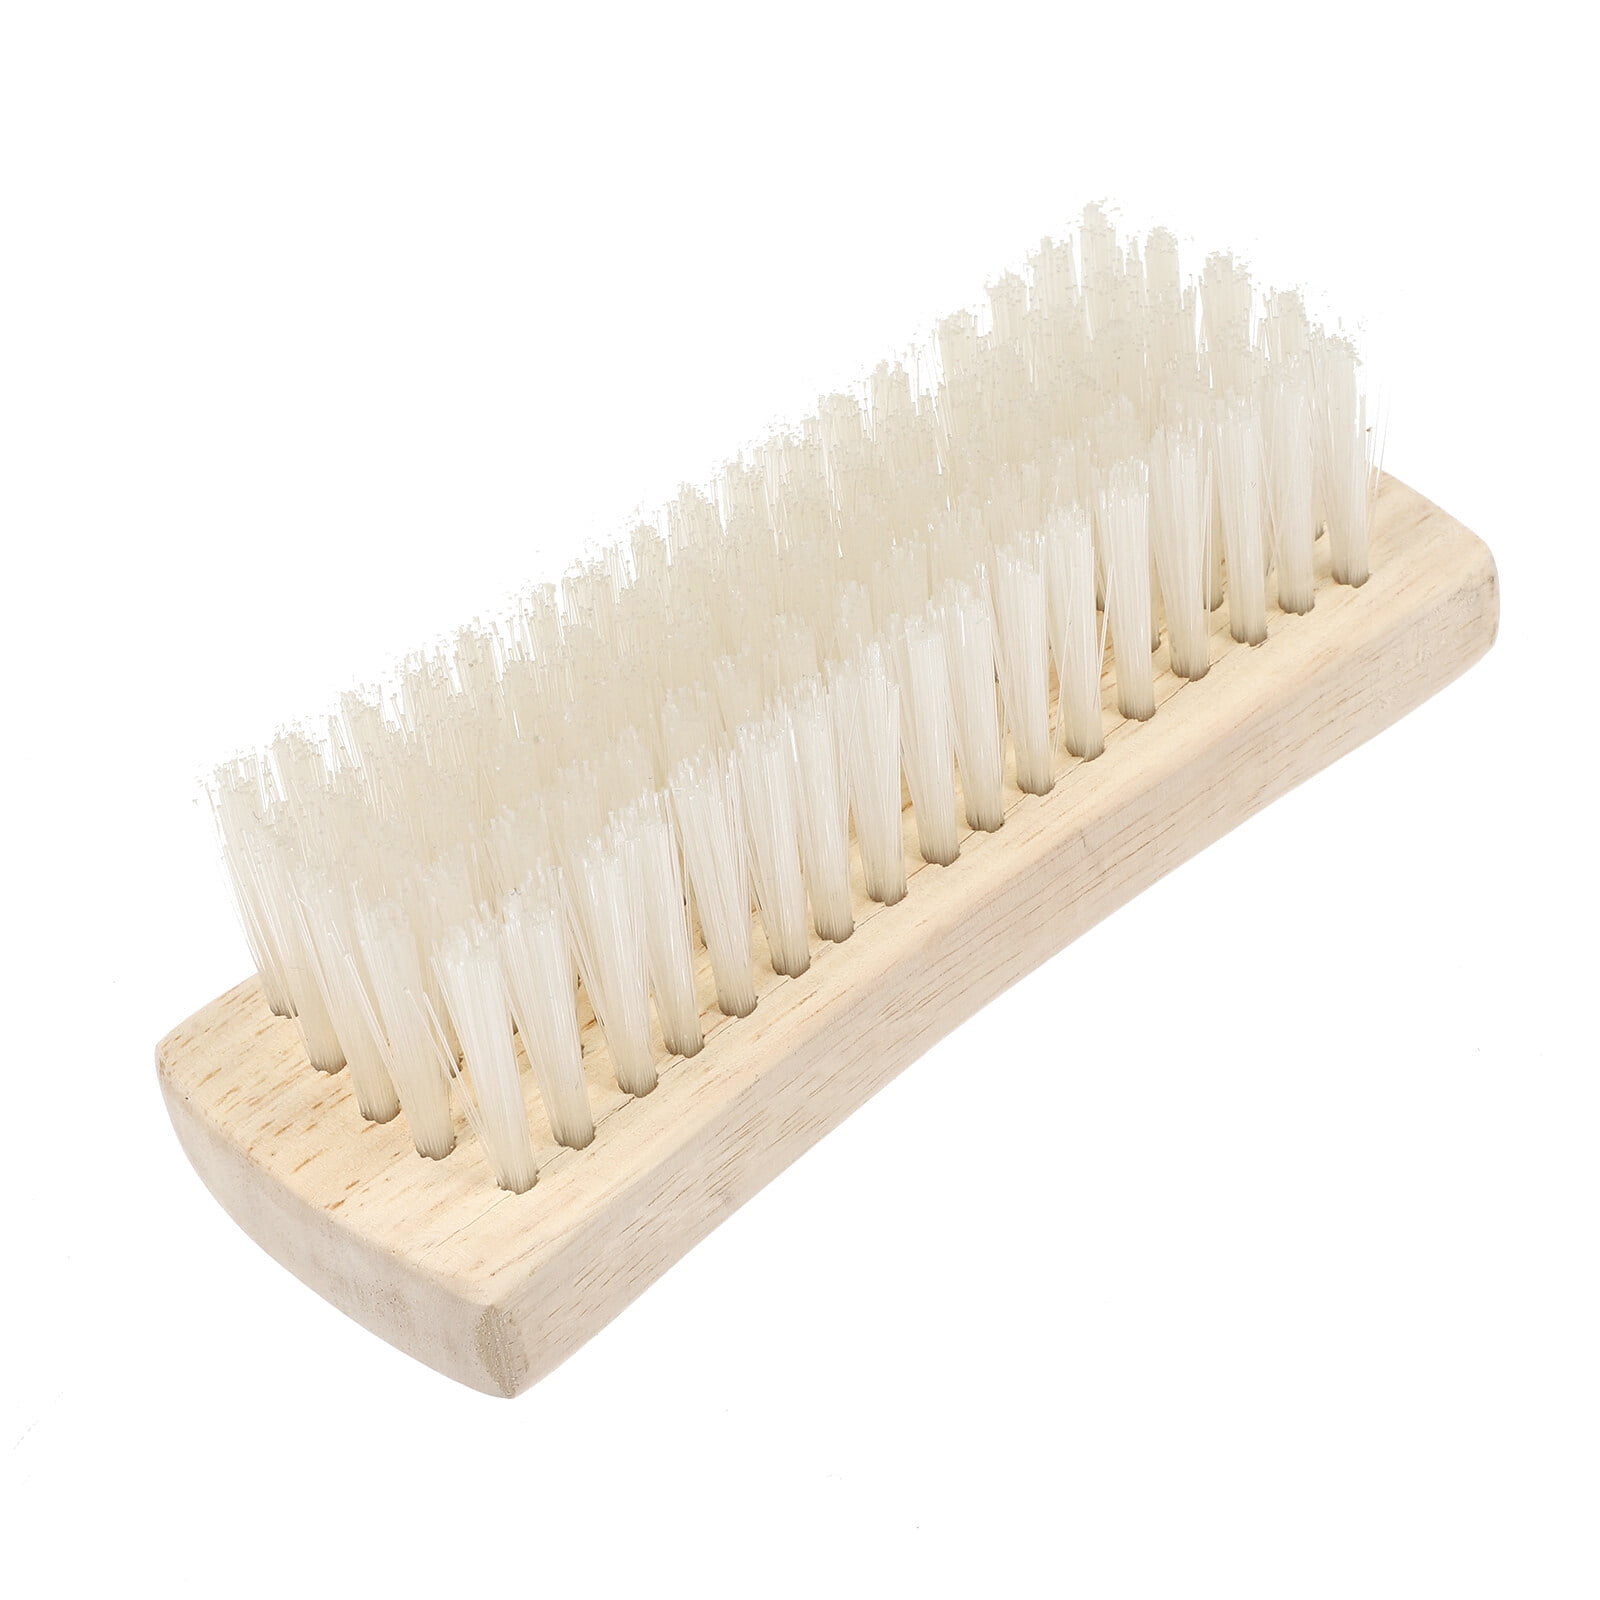 Household Bristle Cleaning BrusCleaning Brush Household Small Laundry Brush  for Soft Bristle Scrub Clothes Shoe Fabric Hand Cleaning Brushh,Press Type  Automatic Liquid Adding Brush 